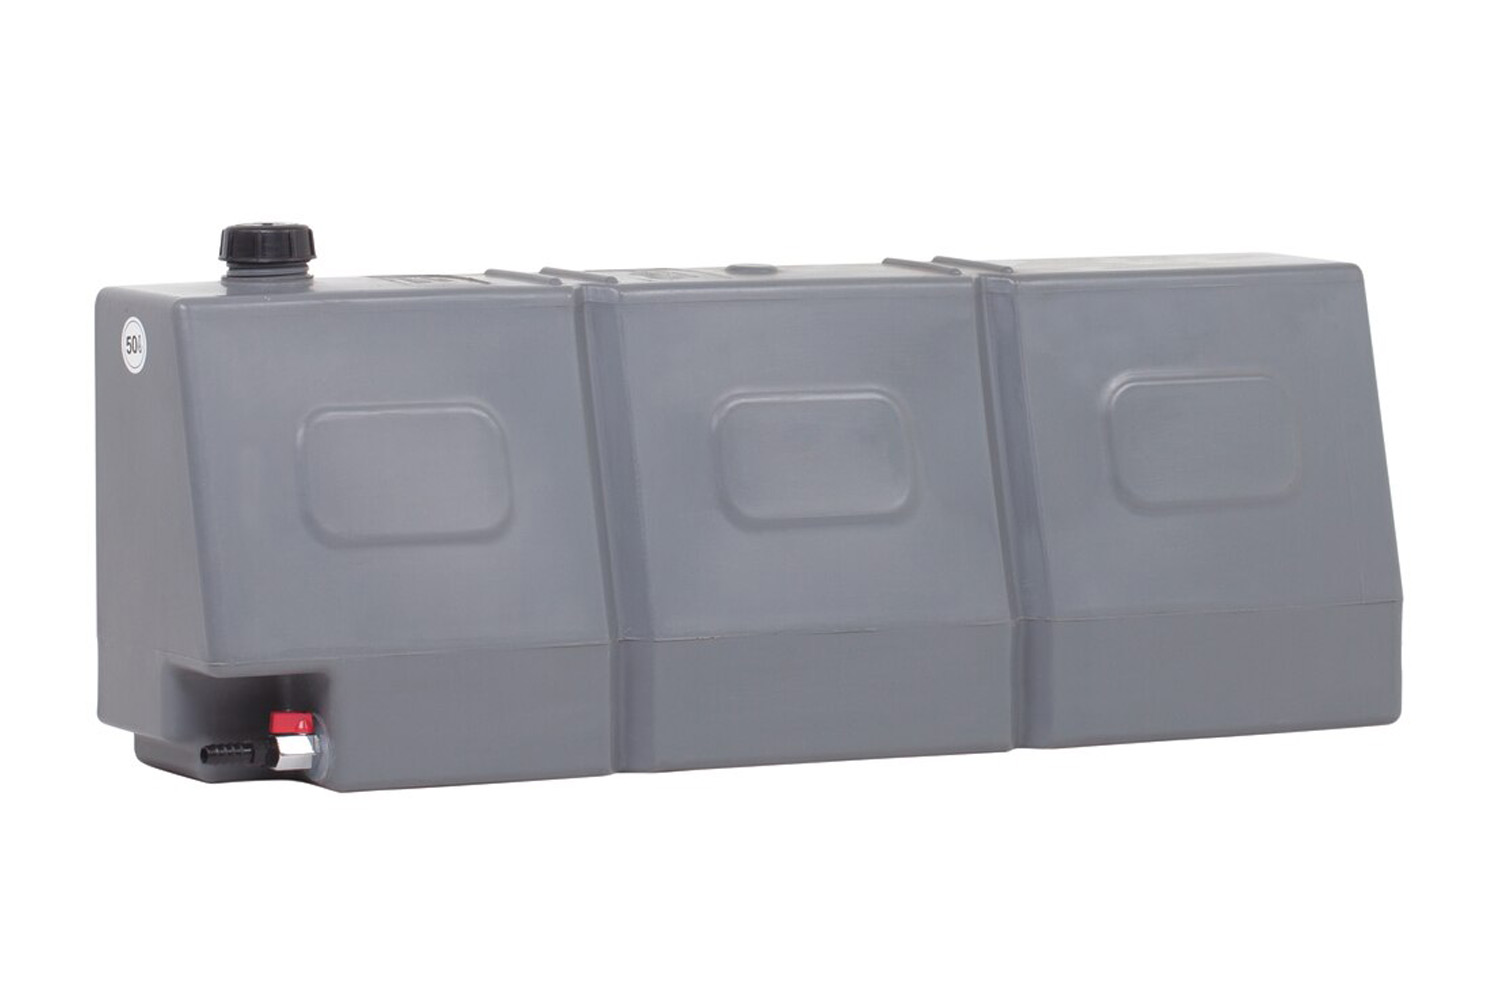 Does the tank have baffles on the inside to prevent water from sloshing from front to back?